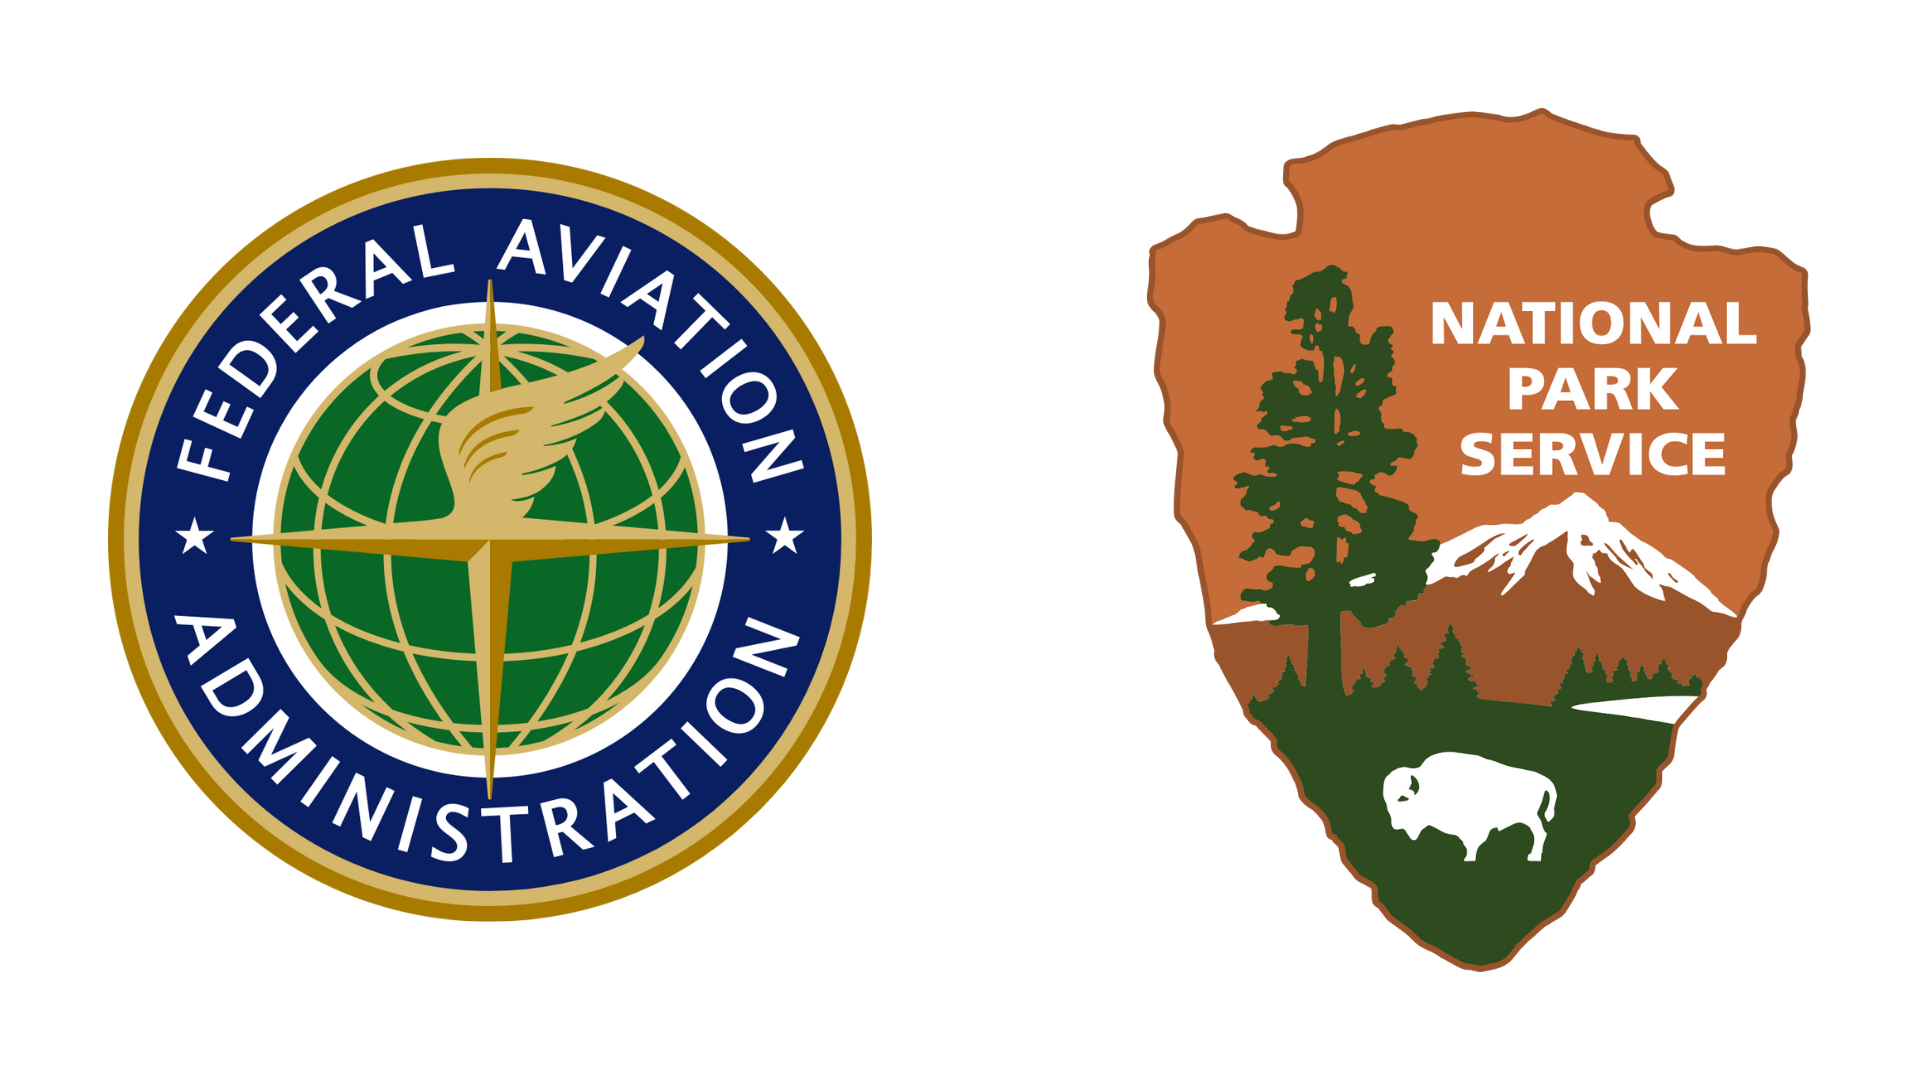 the Federal Aviation Administration Seal and the National Park Service Arrowhead